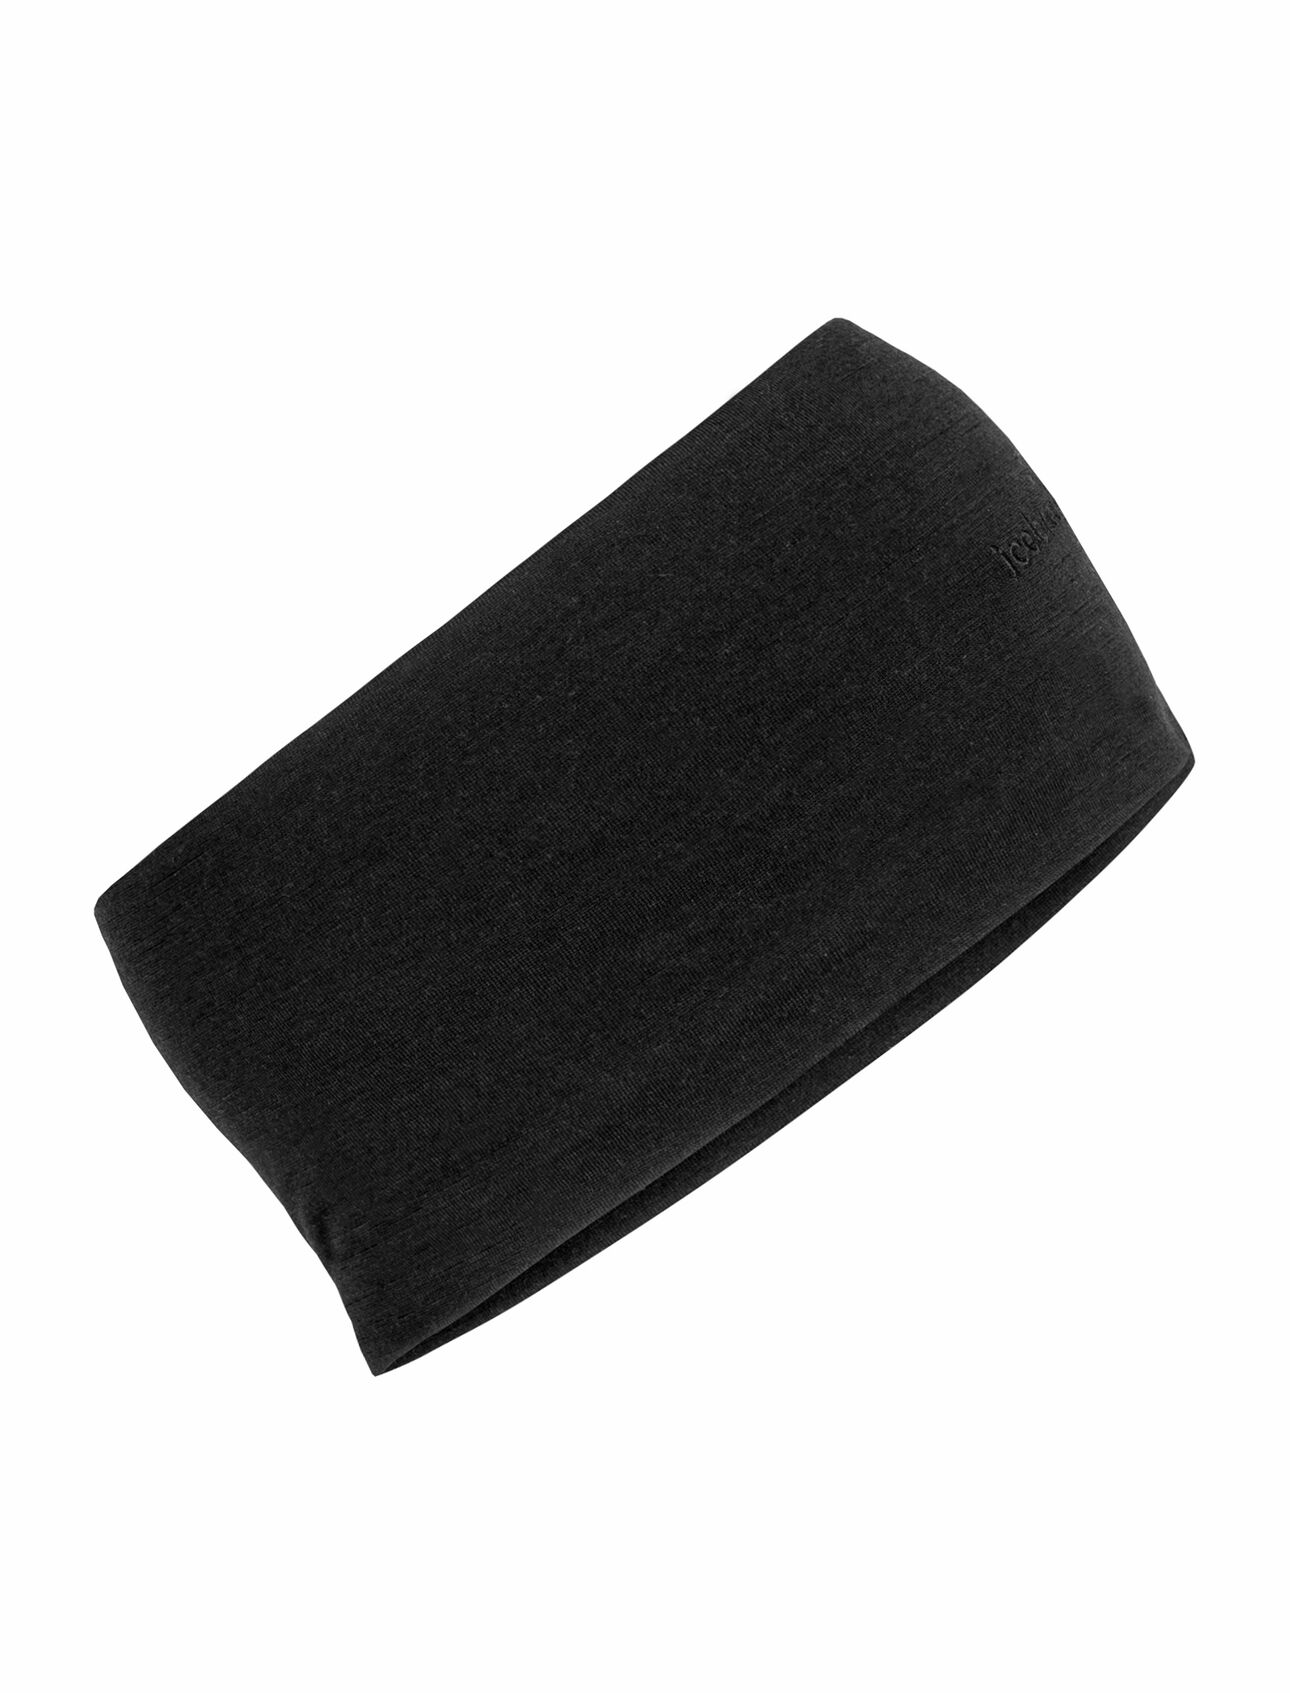 Unisex Cool-Lite™ Merino Blend Flexi Headband Our soft and stretchy merino wool headband for year-round performance, the Flexi Headband features light, breathable and moisture-wicking Cool-Lite™ jersey fabric.